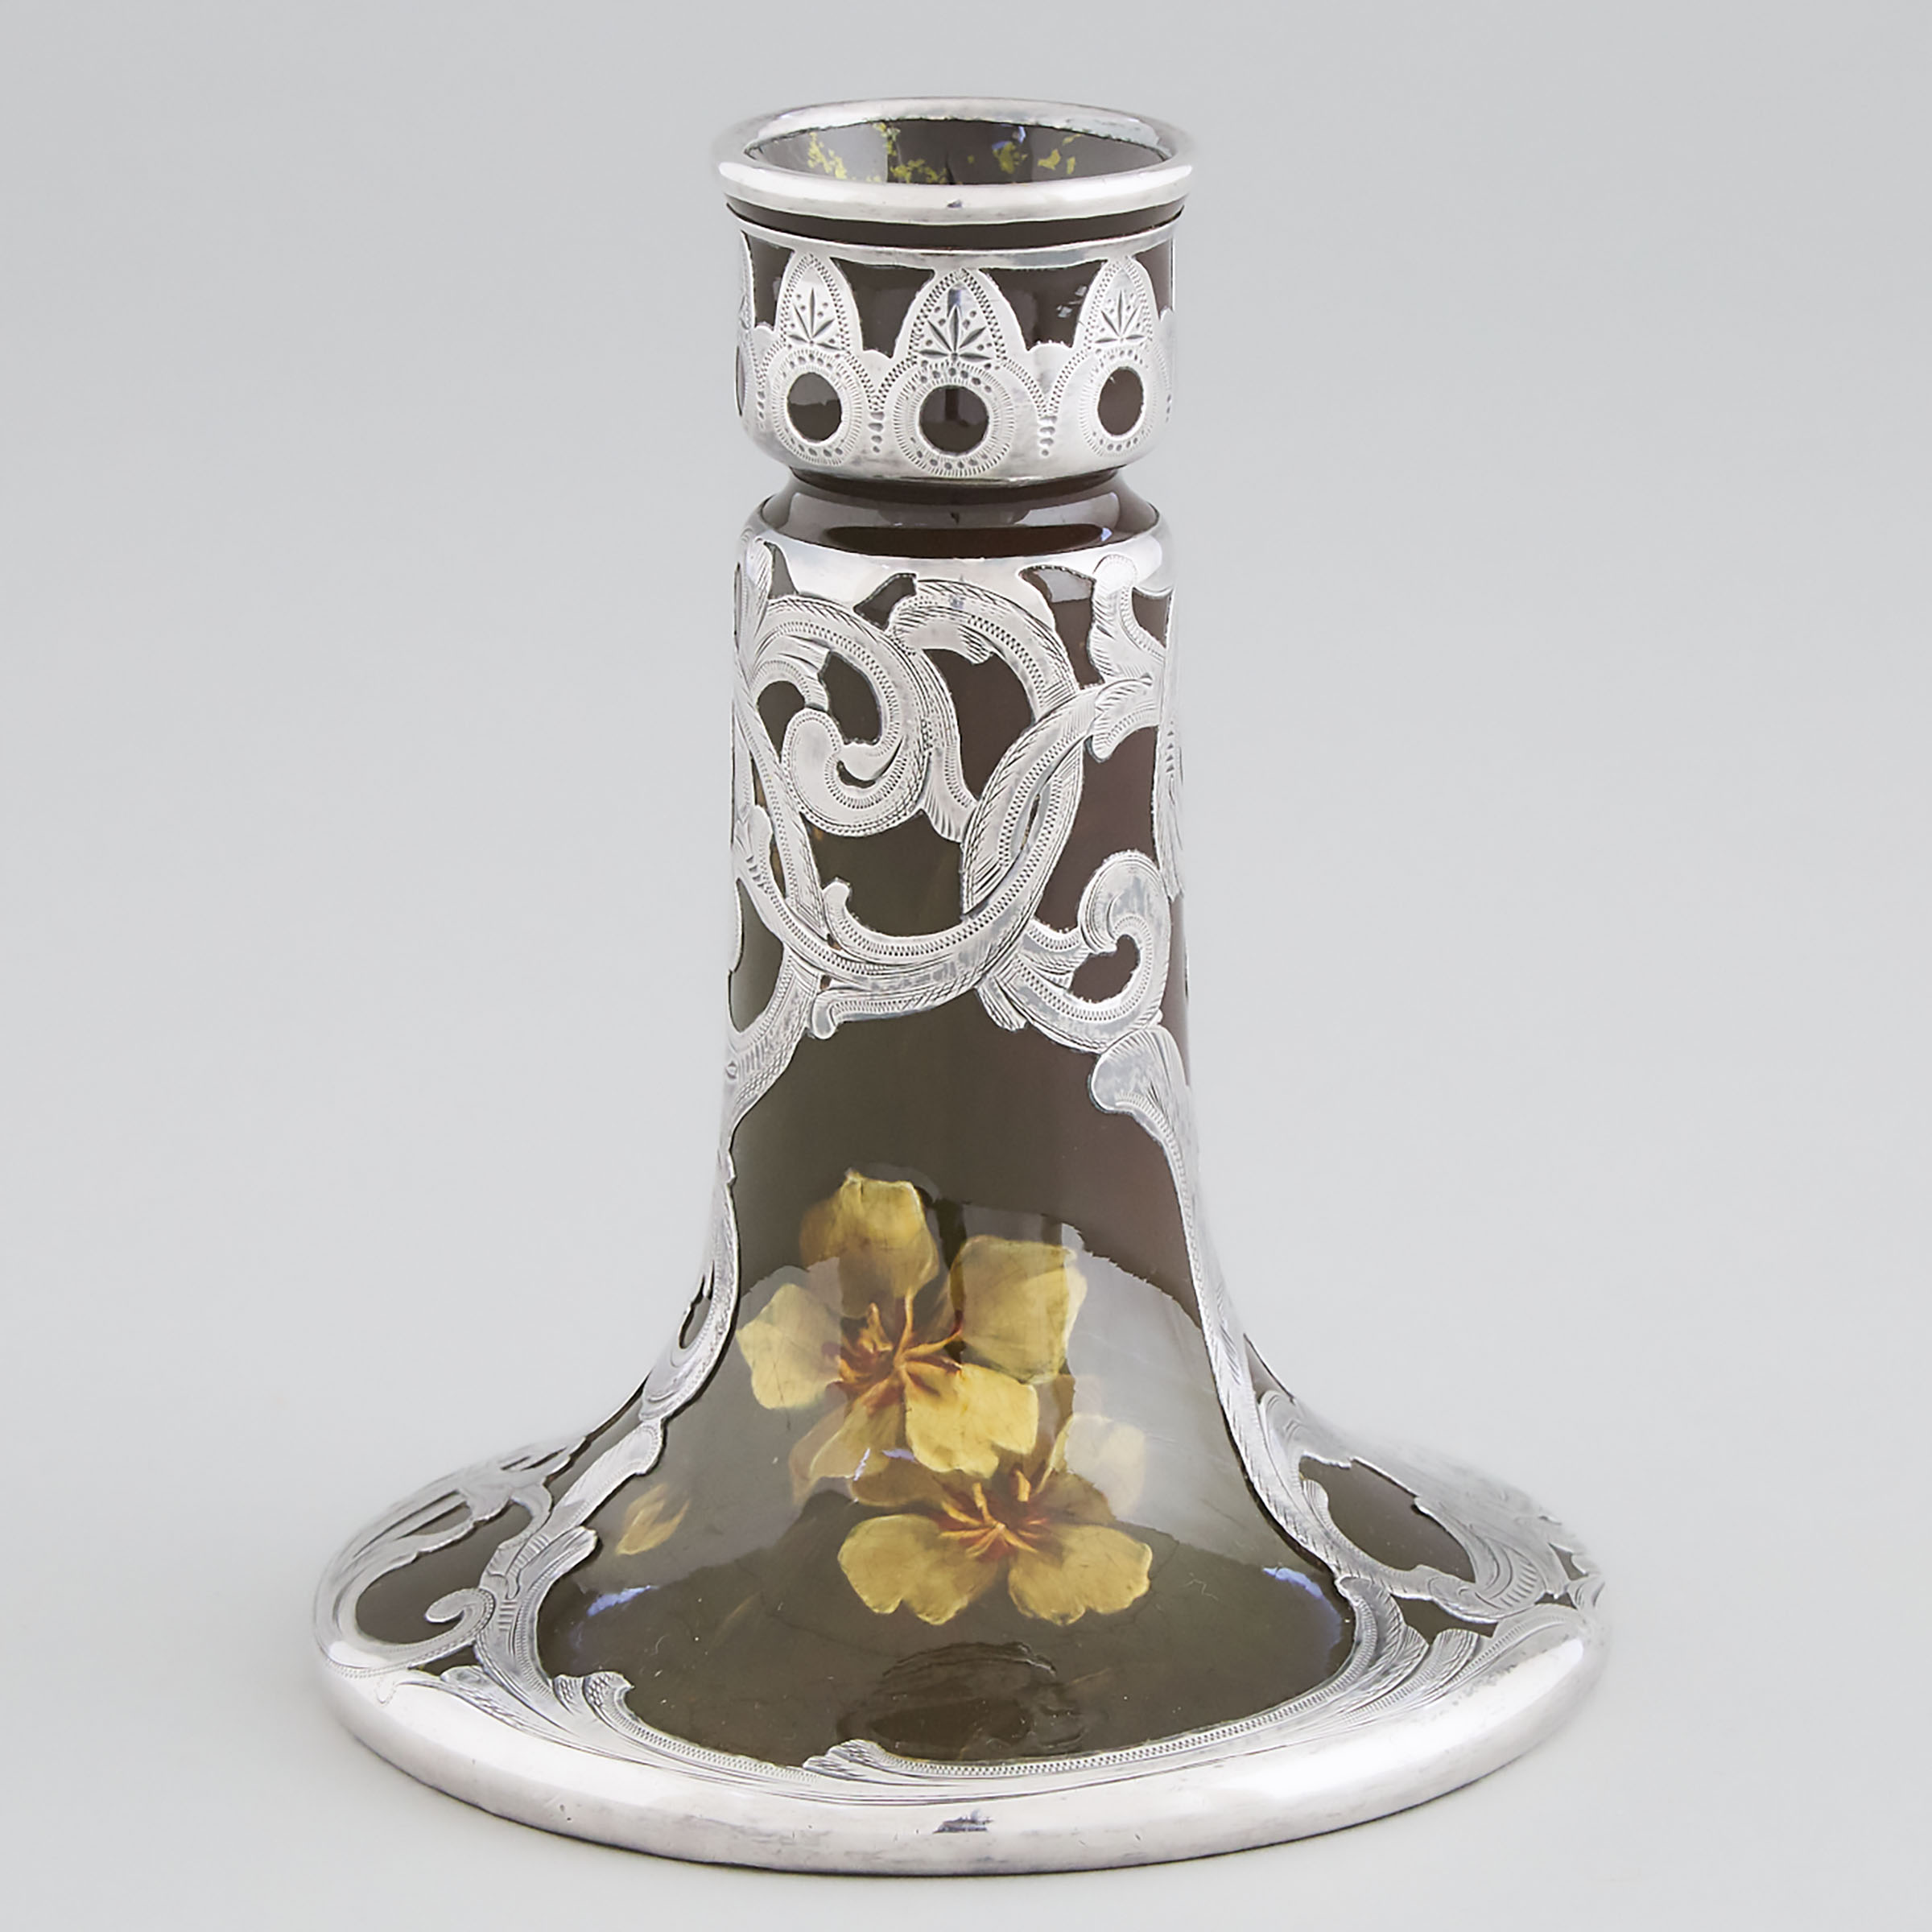 Owens Silver Overlaid Pottery Vase, late 19th/early 20th century